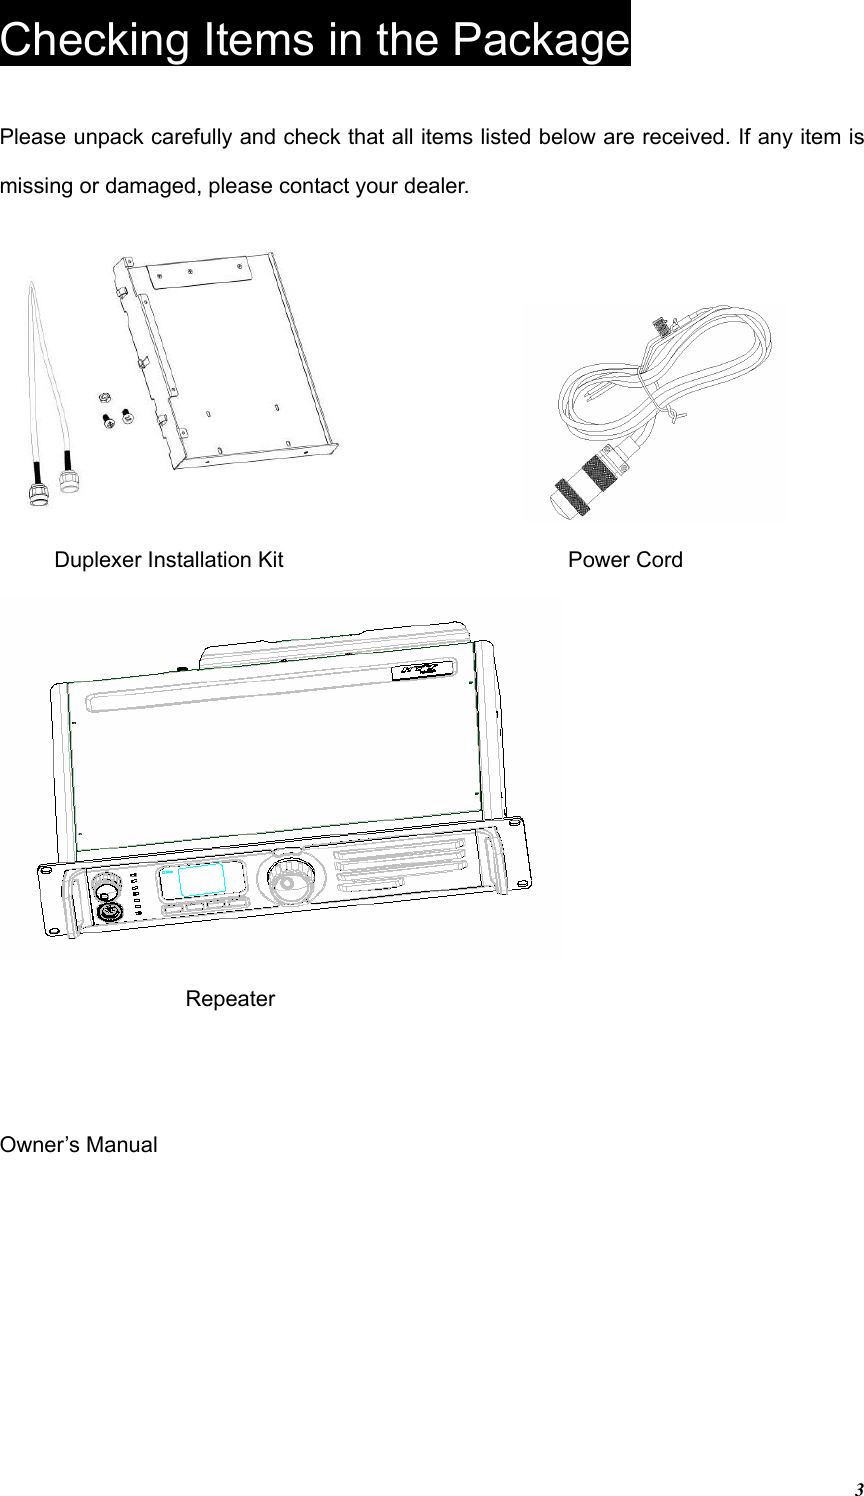 3Checking Items in the Package Please unpack carefully and check that all items listed below are received. If any item is missing or damaged, please contact your dealer.    Duplexer Installation Kit    Power Cord   Repeater Owner’s Manual 